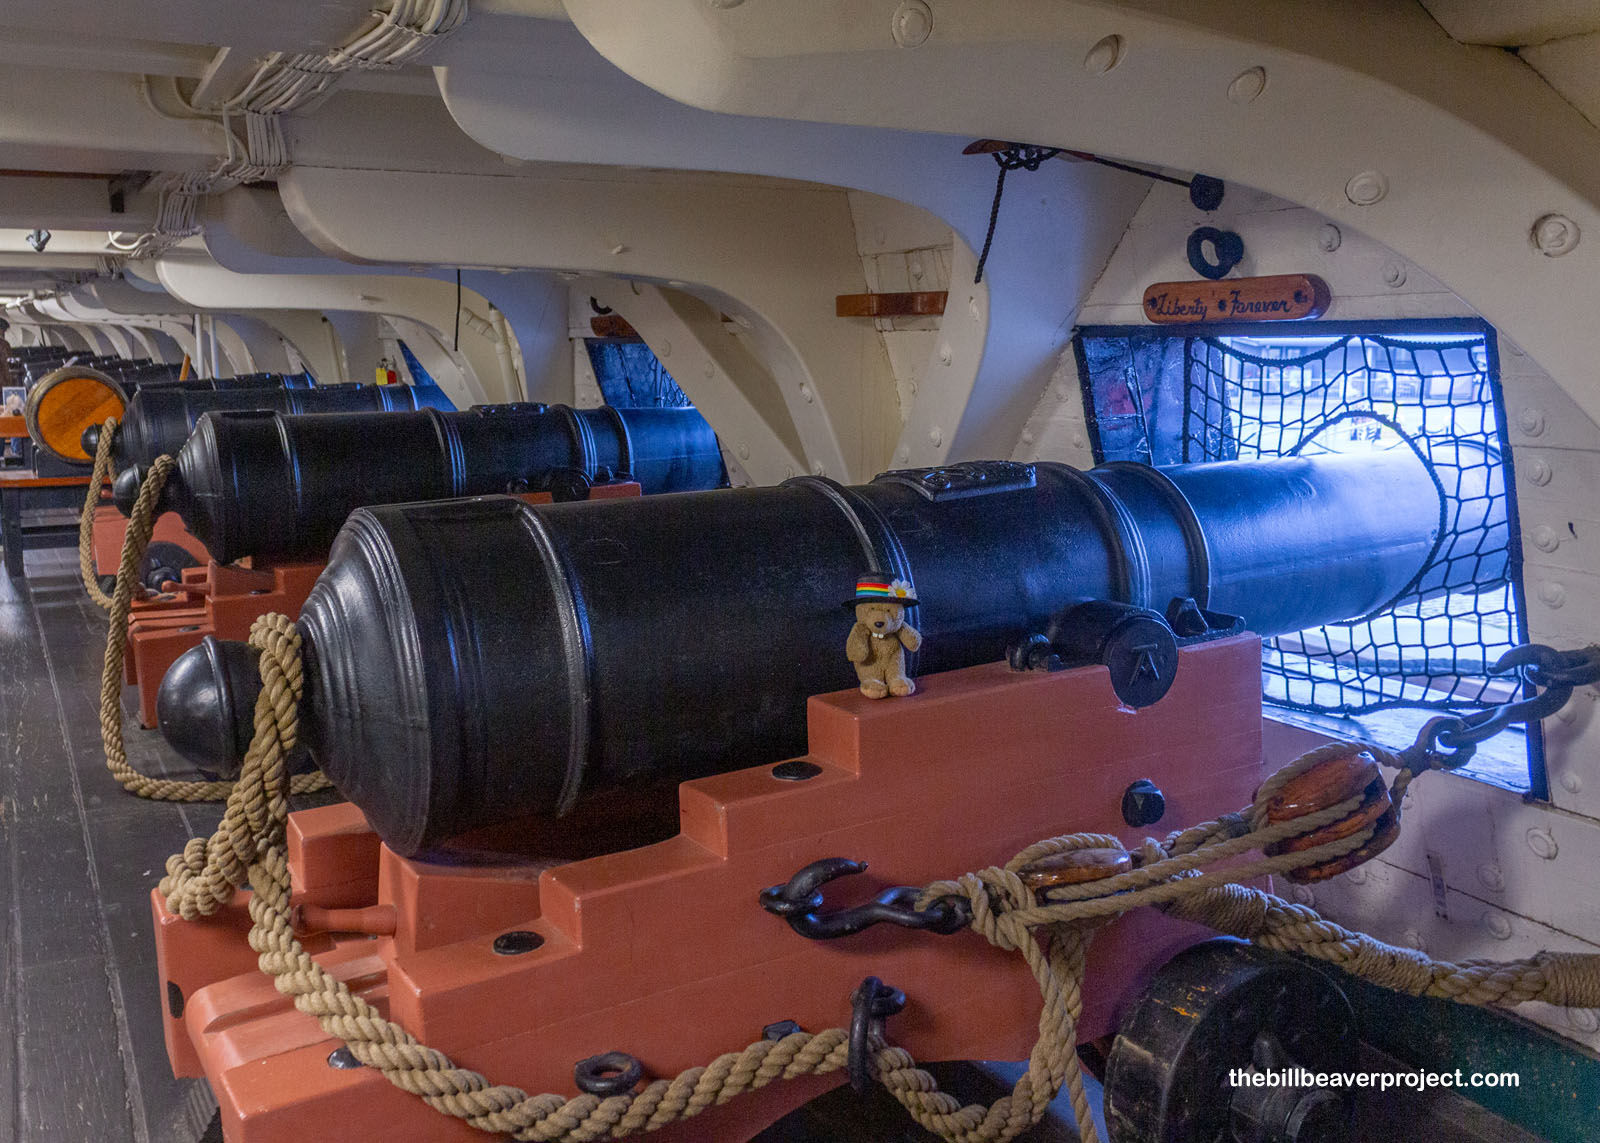 Even more cannons on the lower deck!